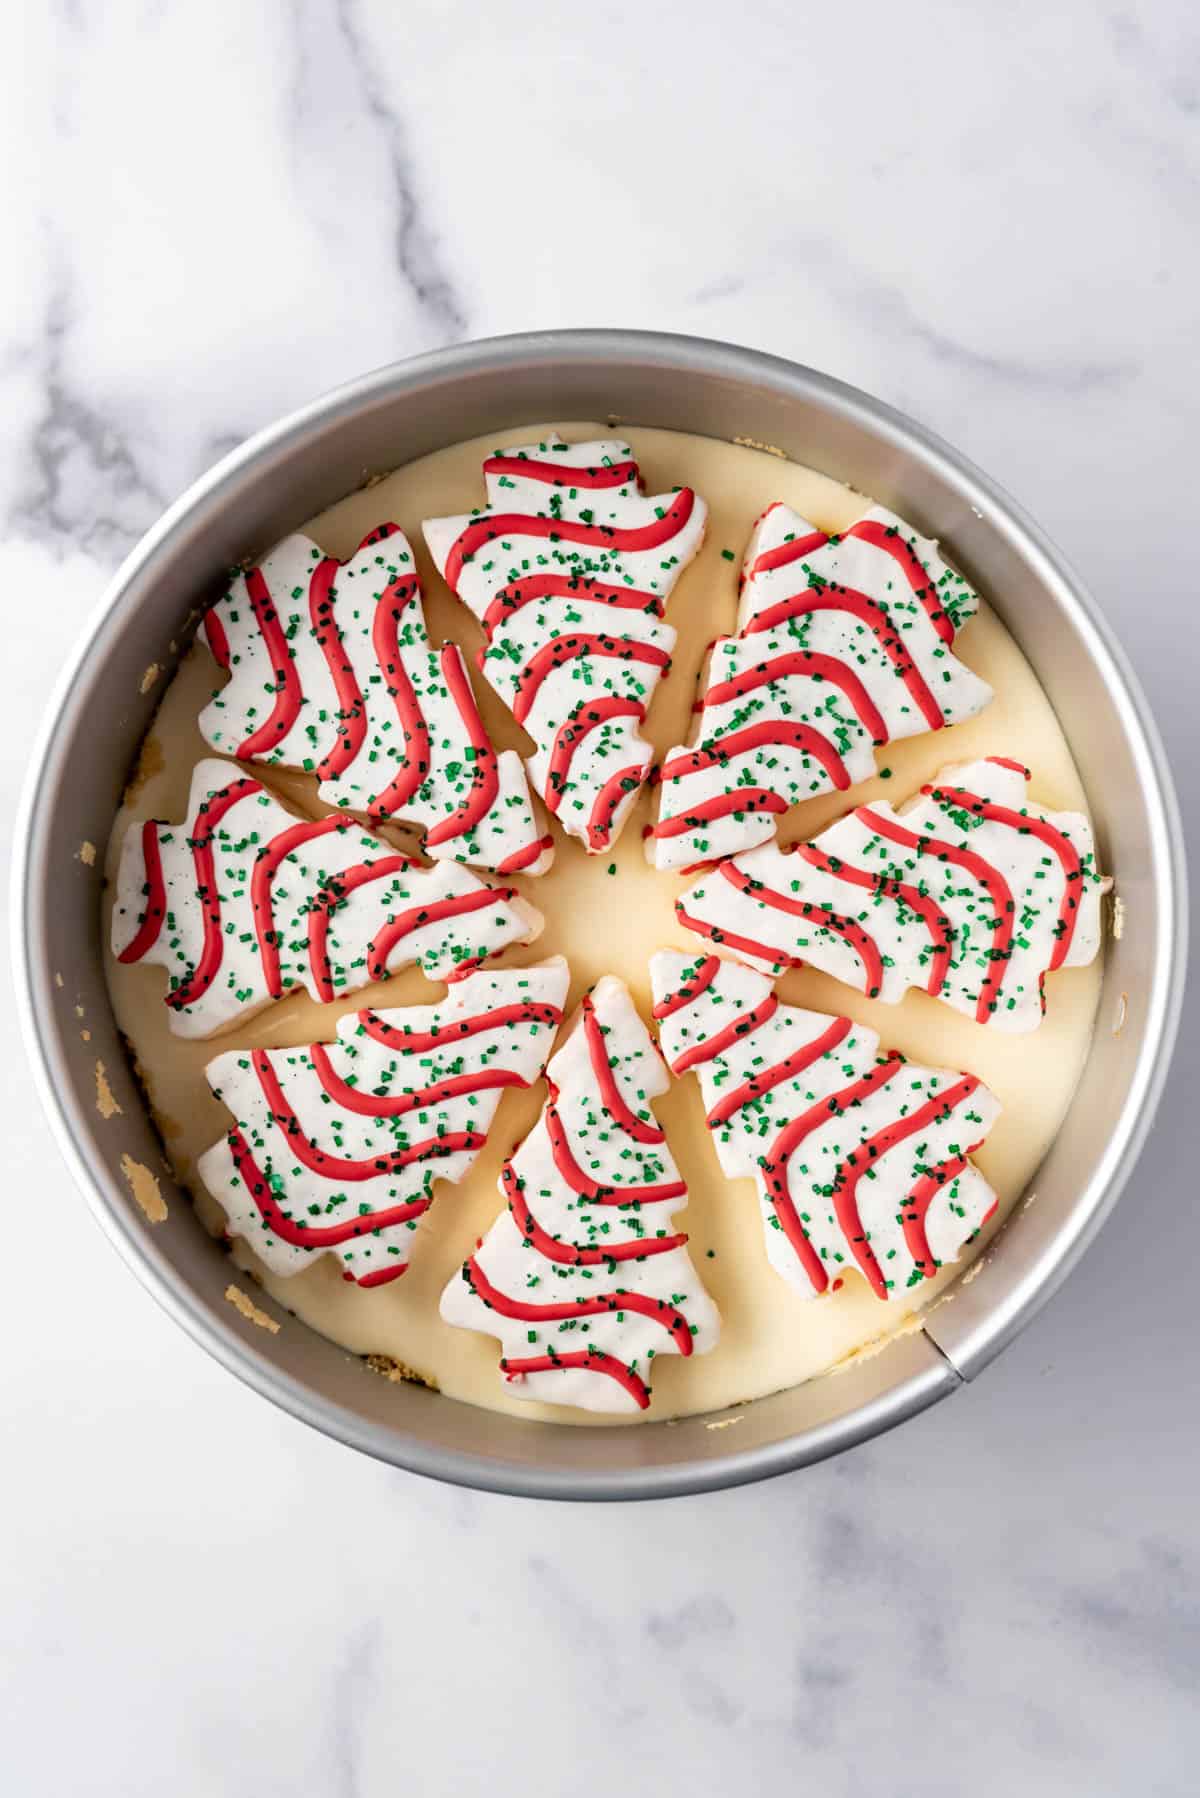 Arranging unwrapped Little Debbie Christmas Tree cakes into a springform pan.